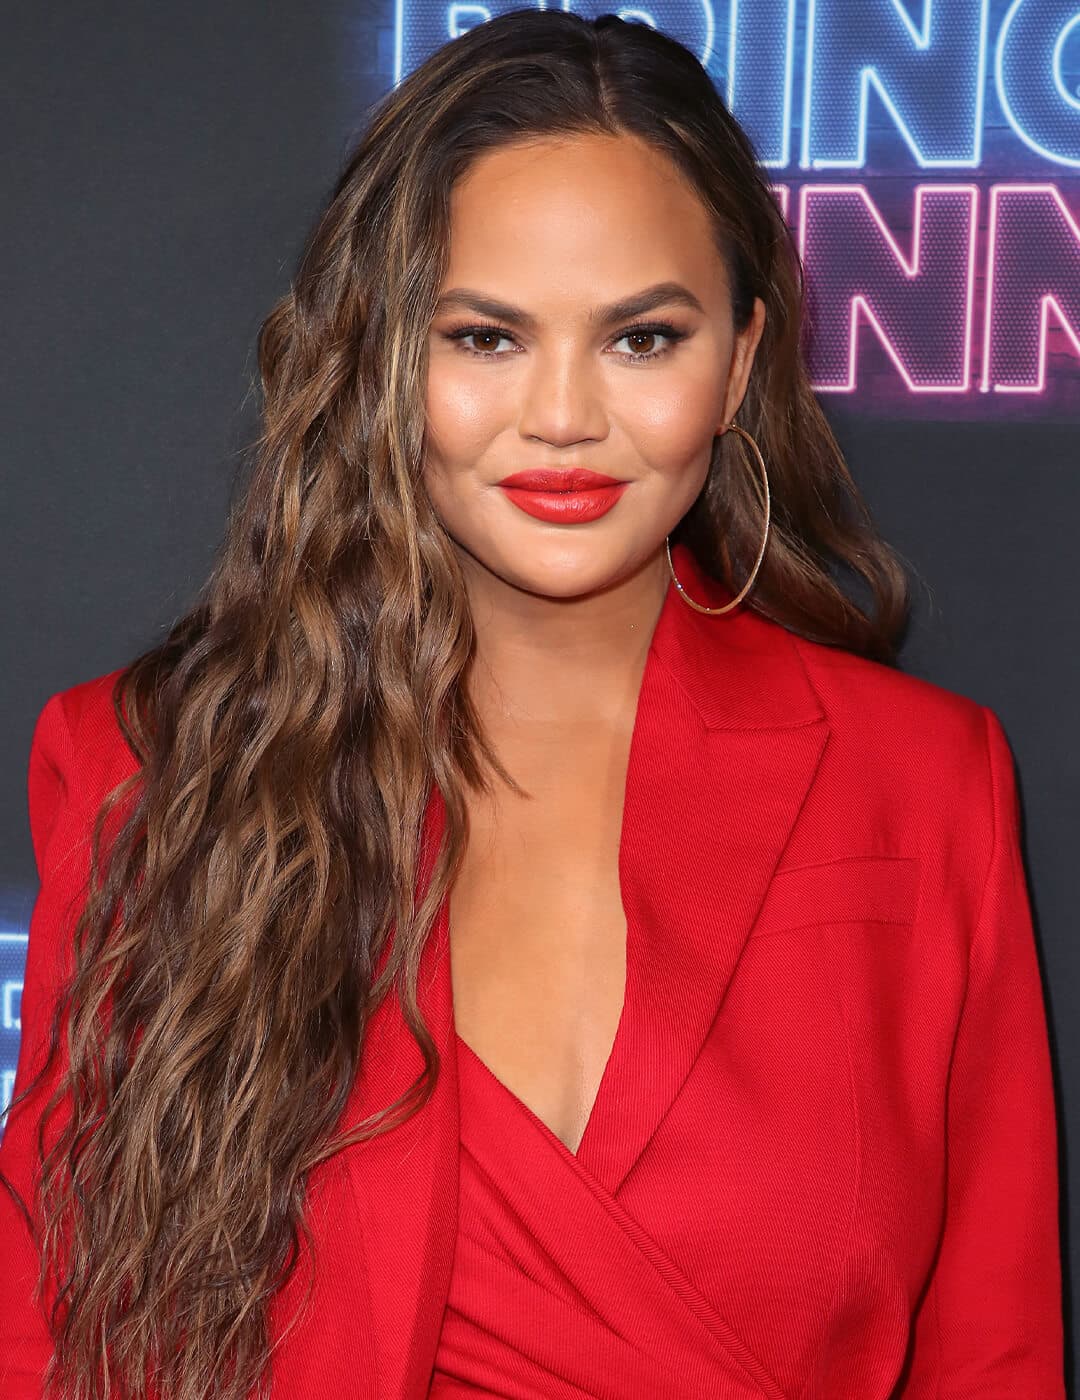 Chrissy Teigen rocking a long and wavy hairstyle with bold red lips and big hoop earrings in a red suit